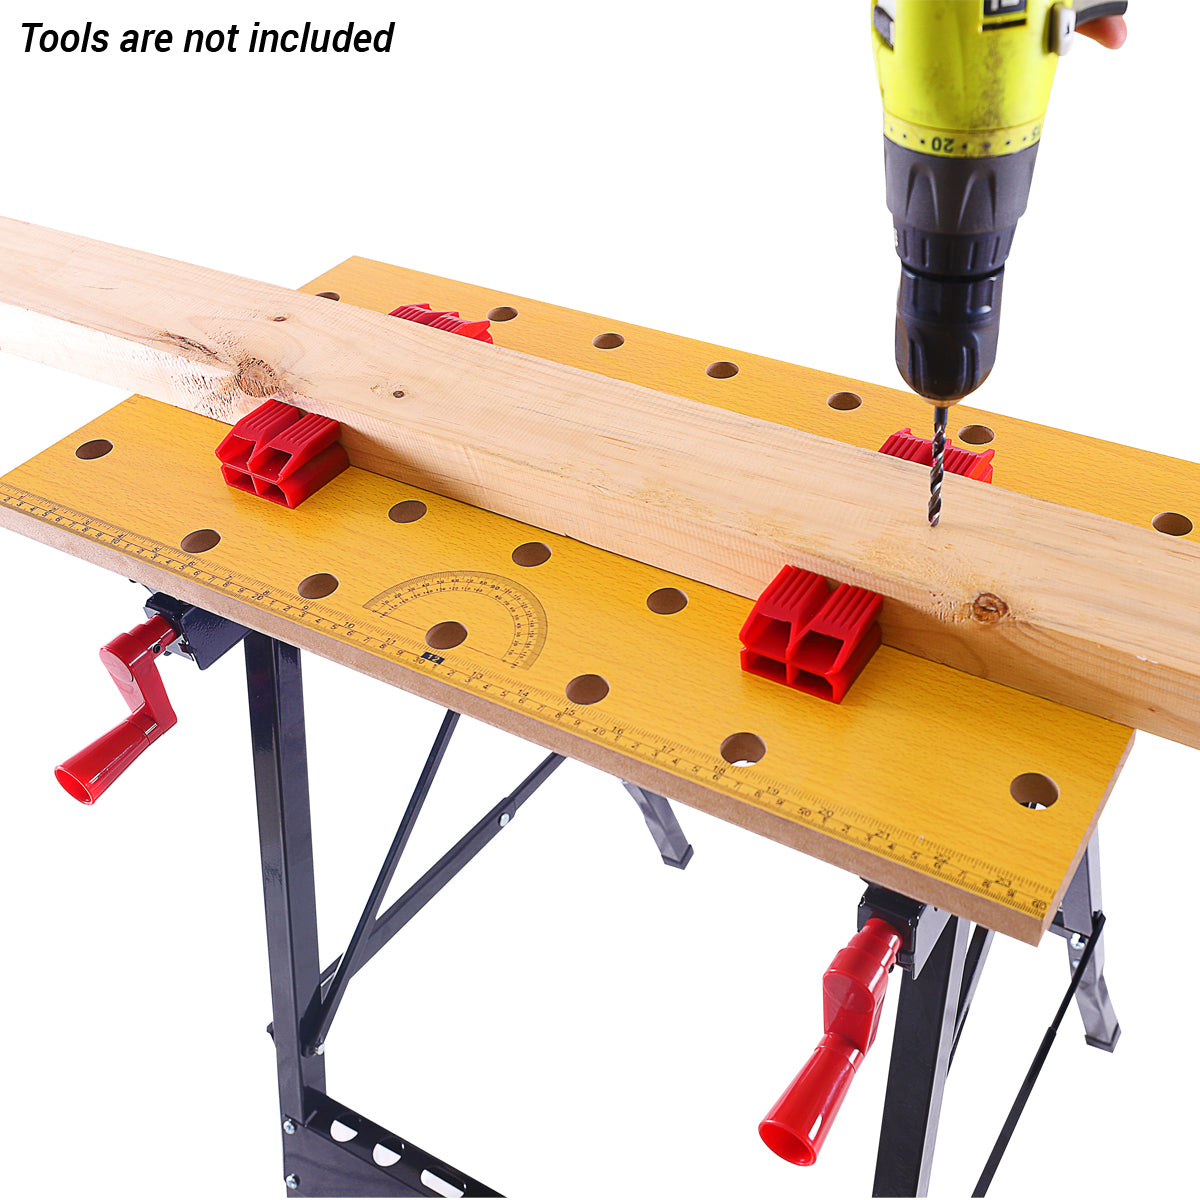 Excel Flip Top Workbench & Foldable Vise with Stand